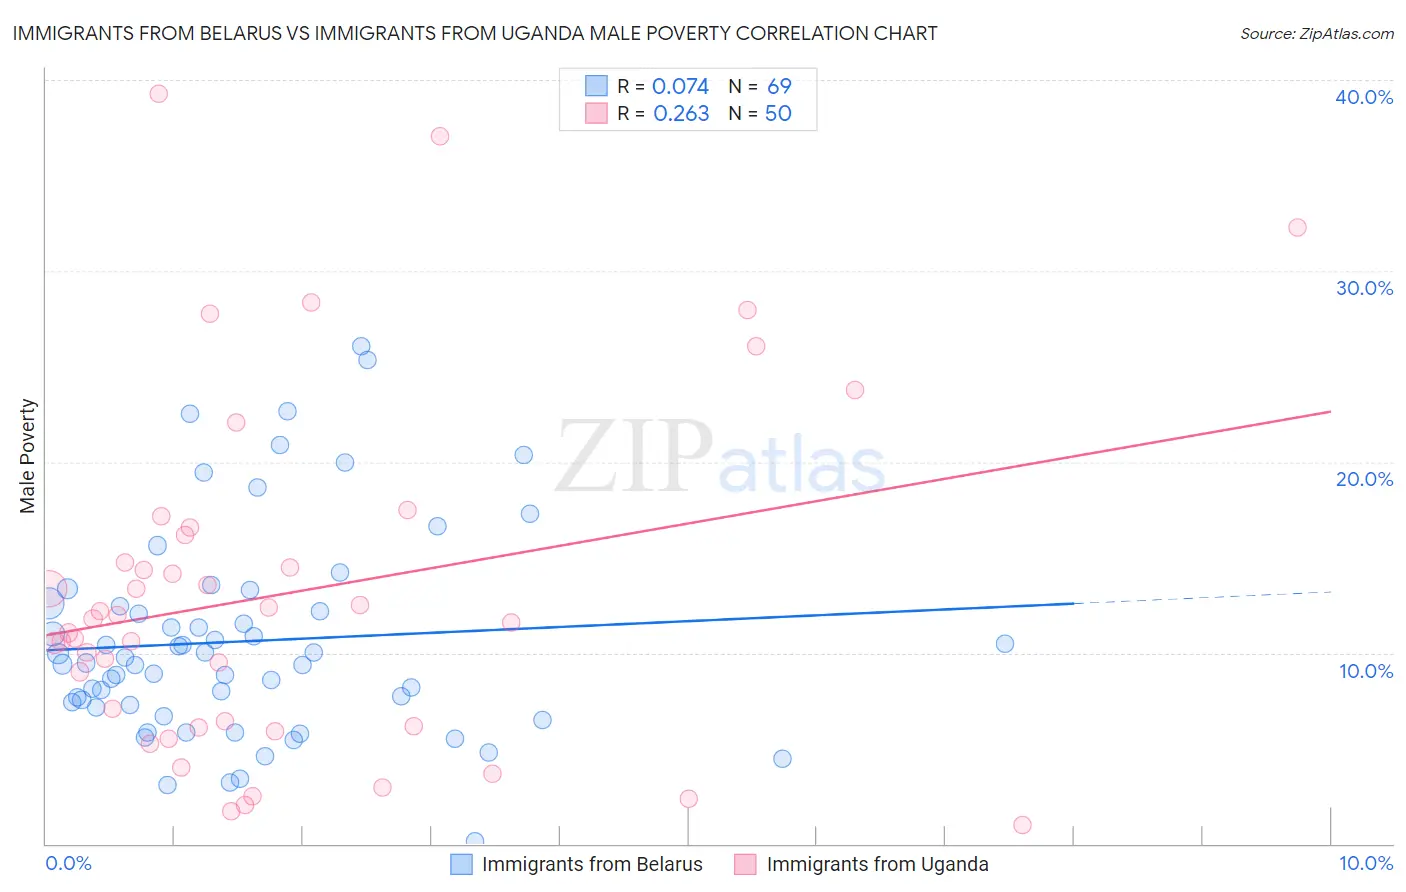 Immigrants from Belarus vs Immigrants from Uganda Male Poverty